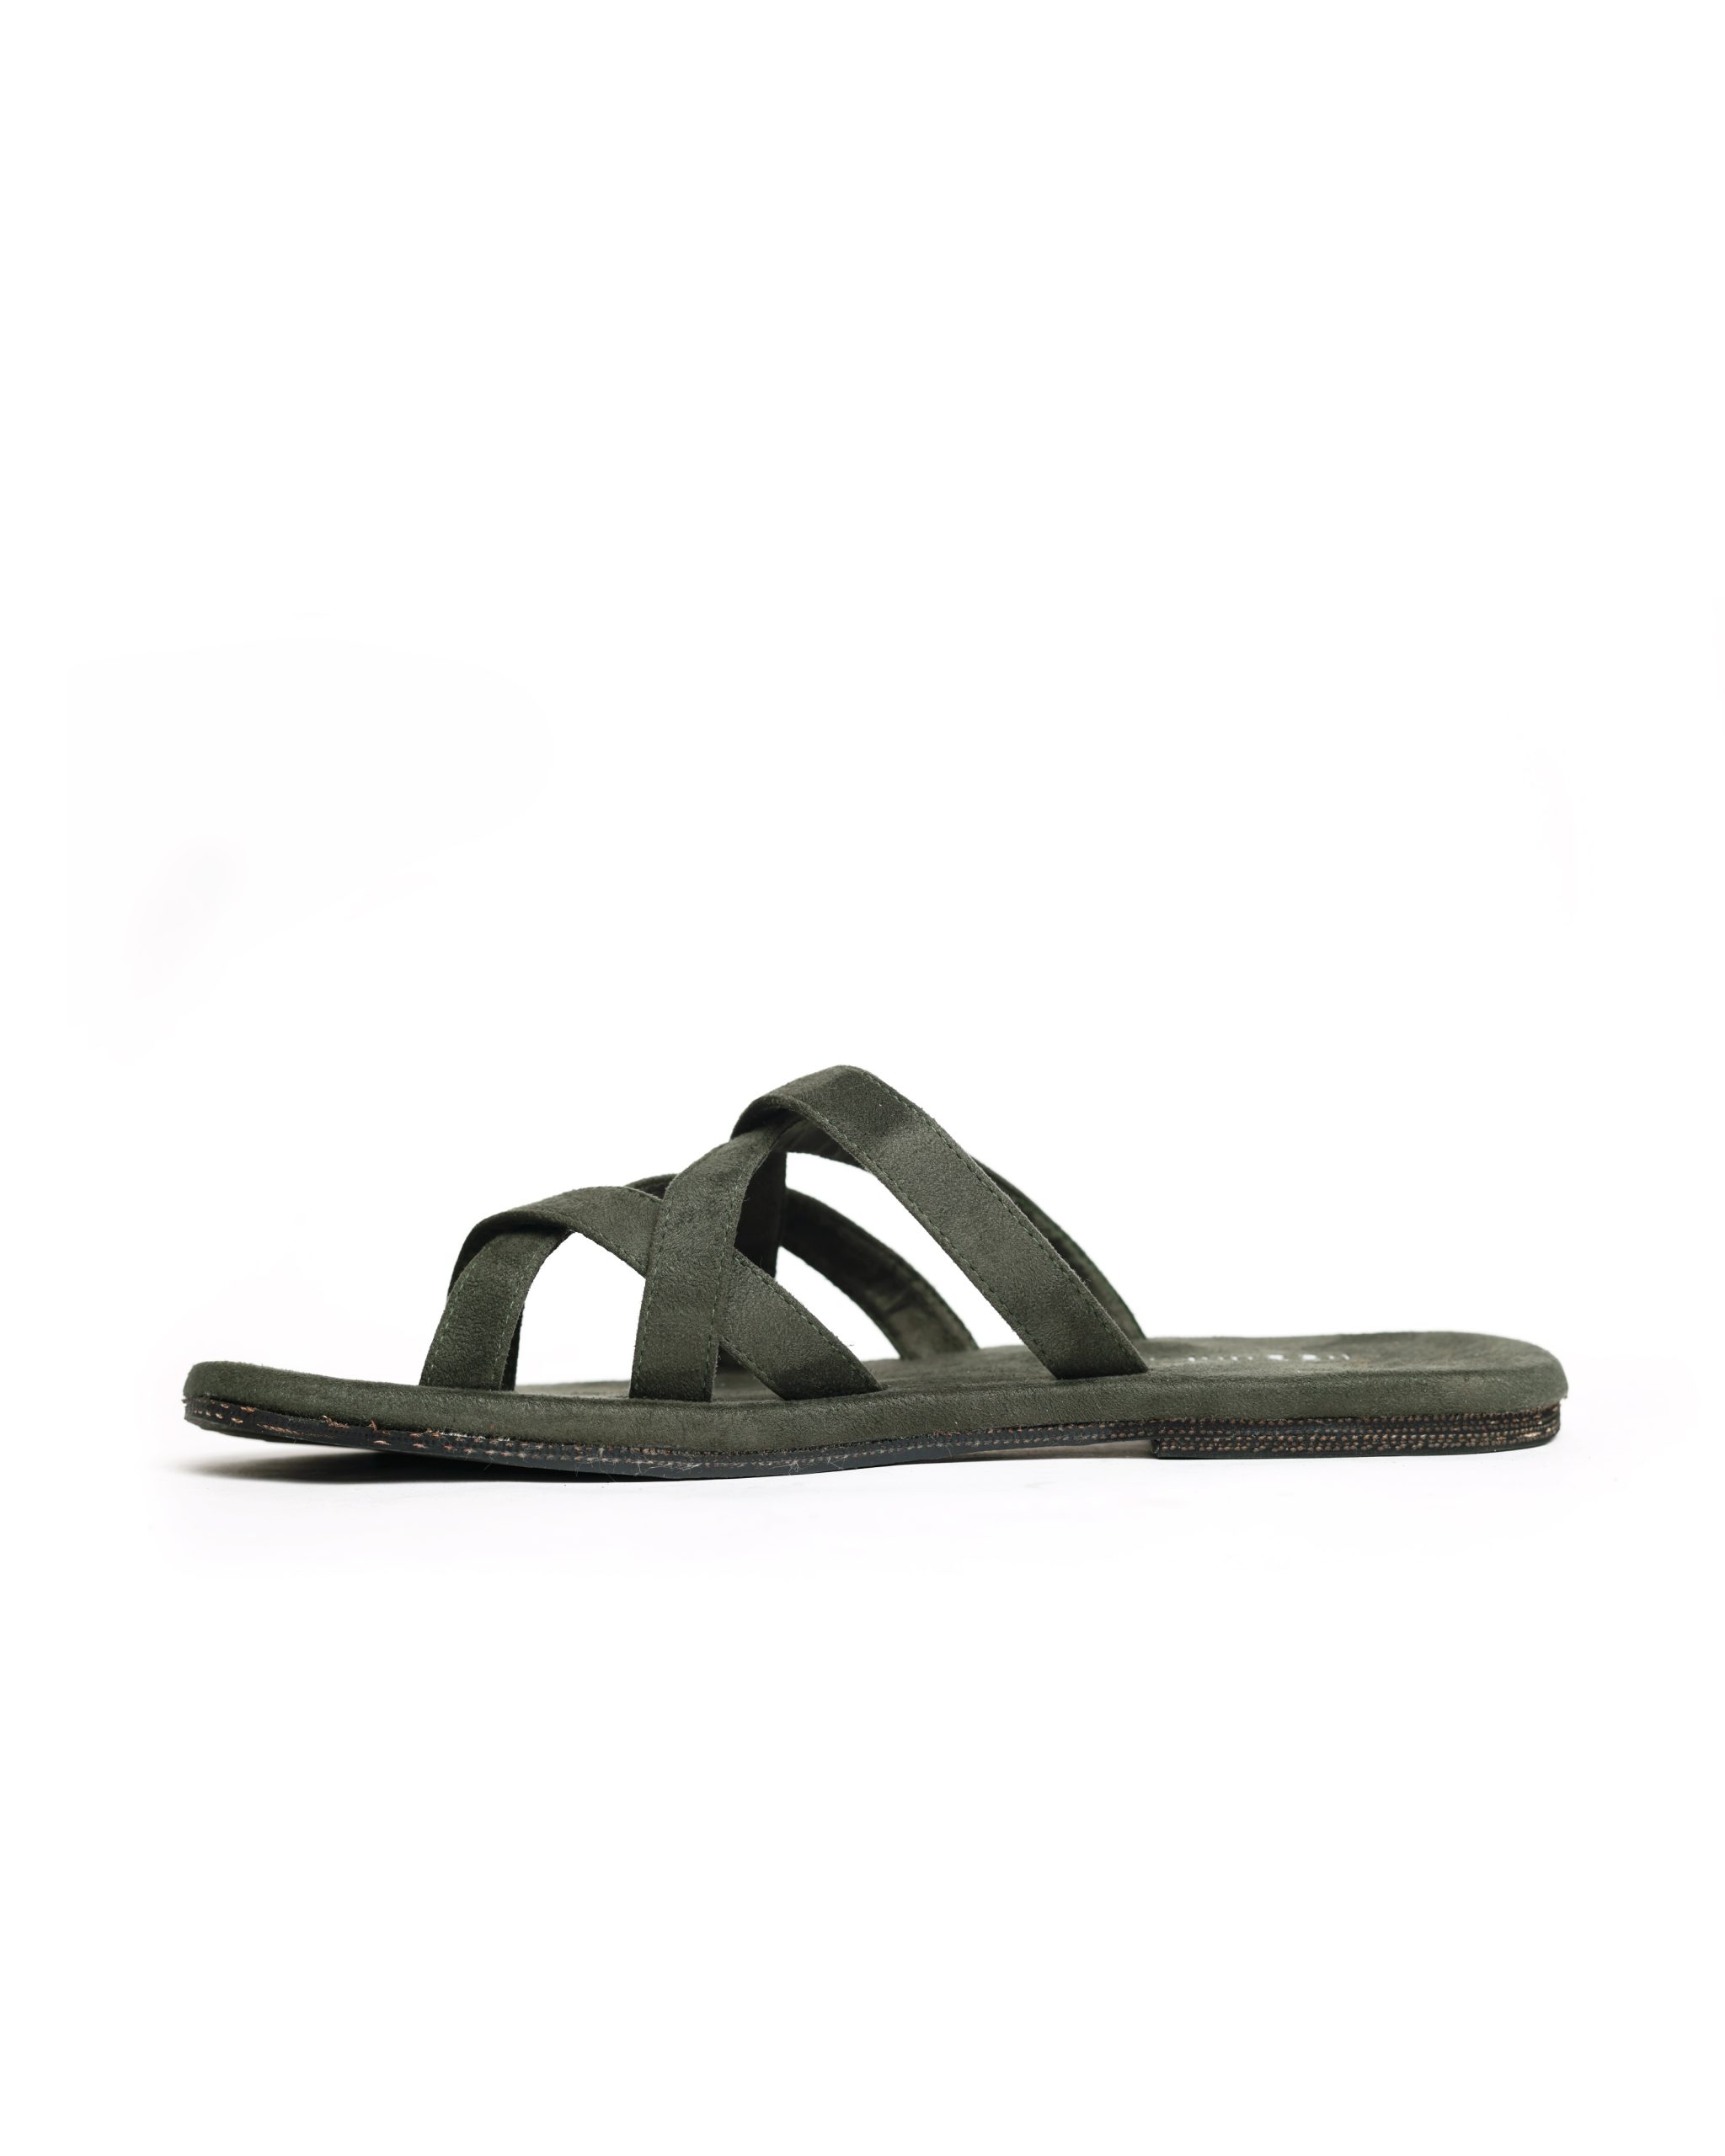 Product: Paaduks Radial Green Flats For Men